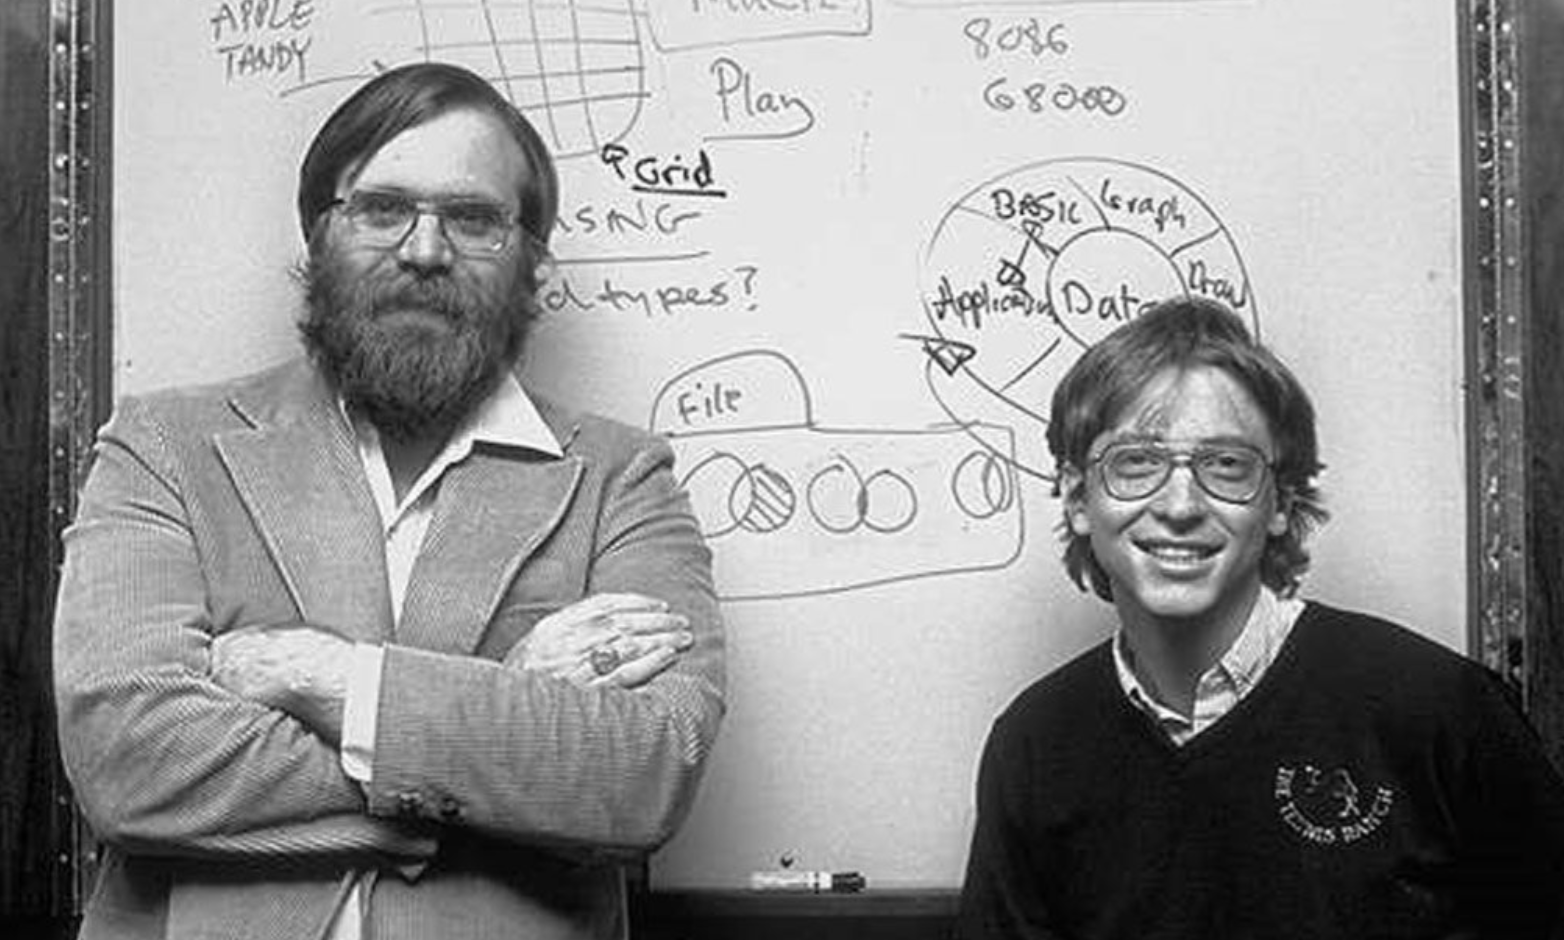 young bill gates - Apple Tandy Play Grid Sing 8086 68000 Basic eraph d types? Applia Data File